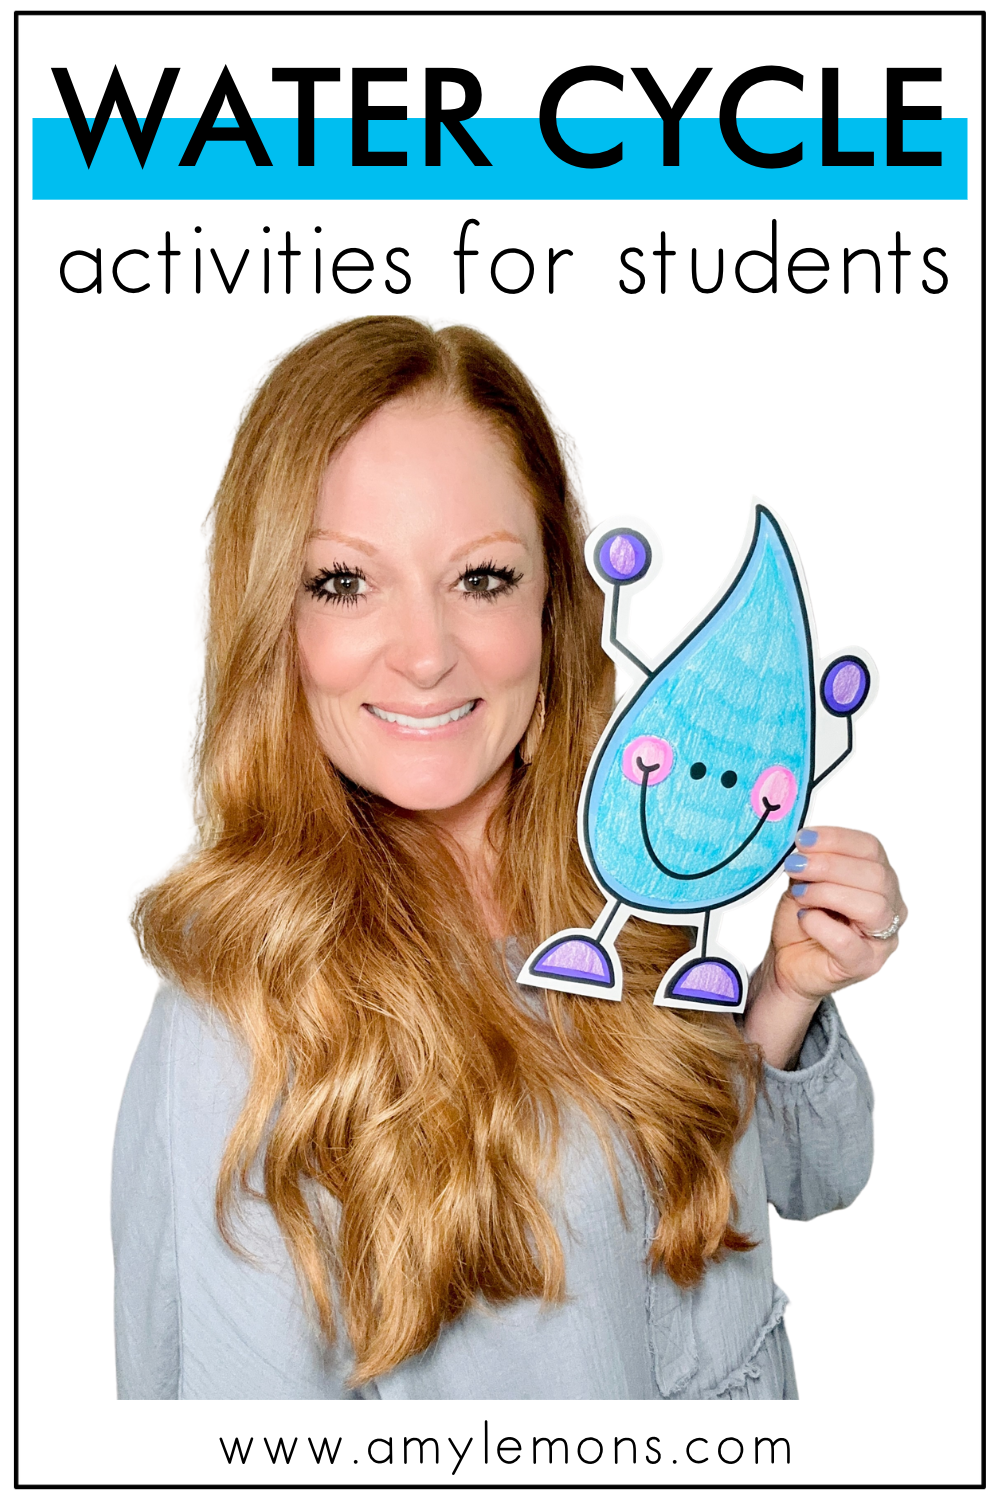 Fun Hands-On Water Cycle Activities with Teaching Videos - Amy ...